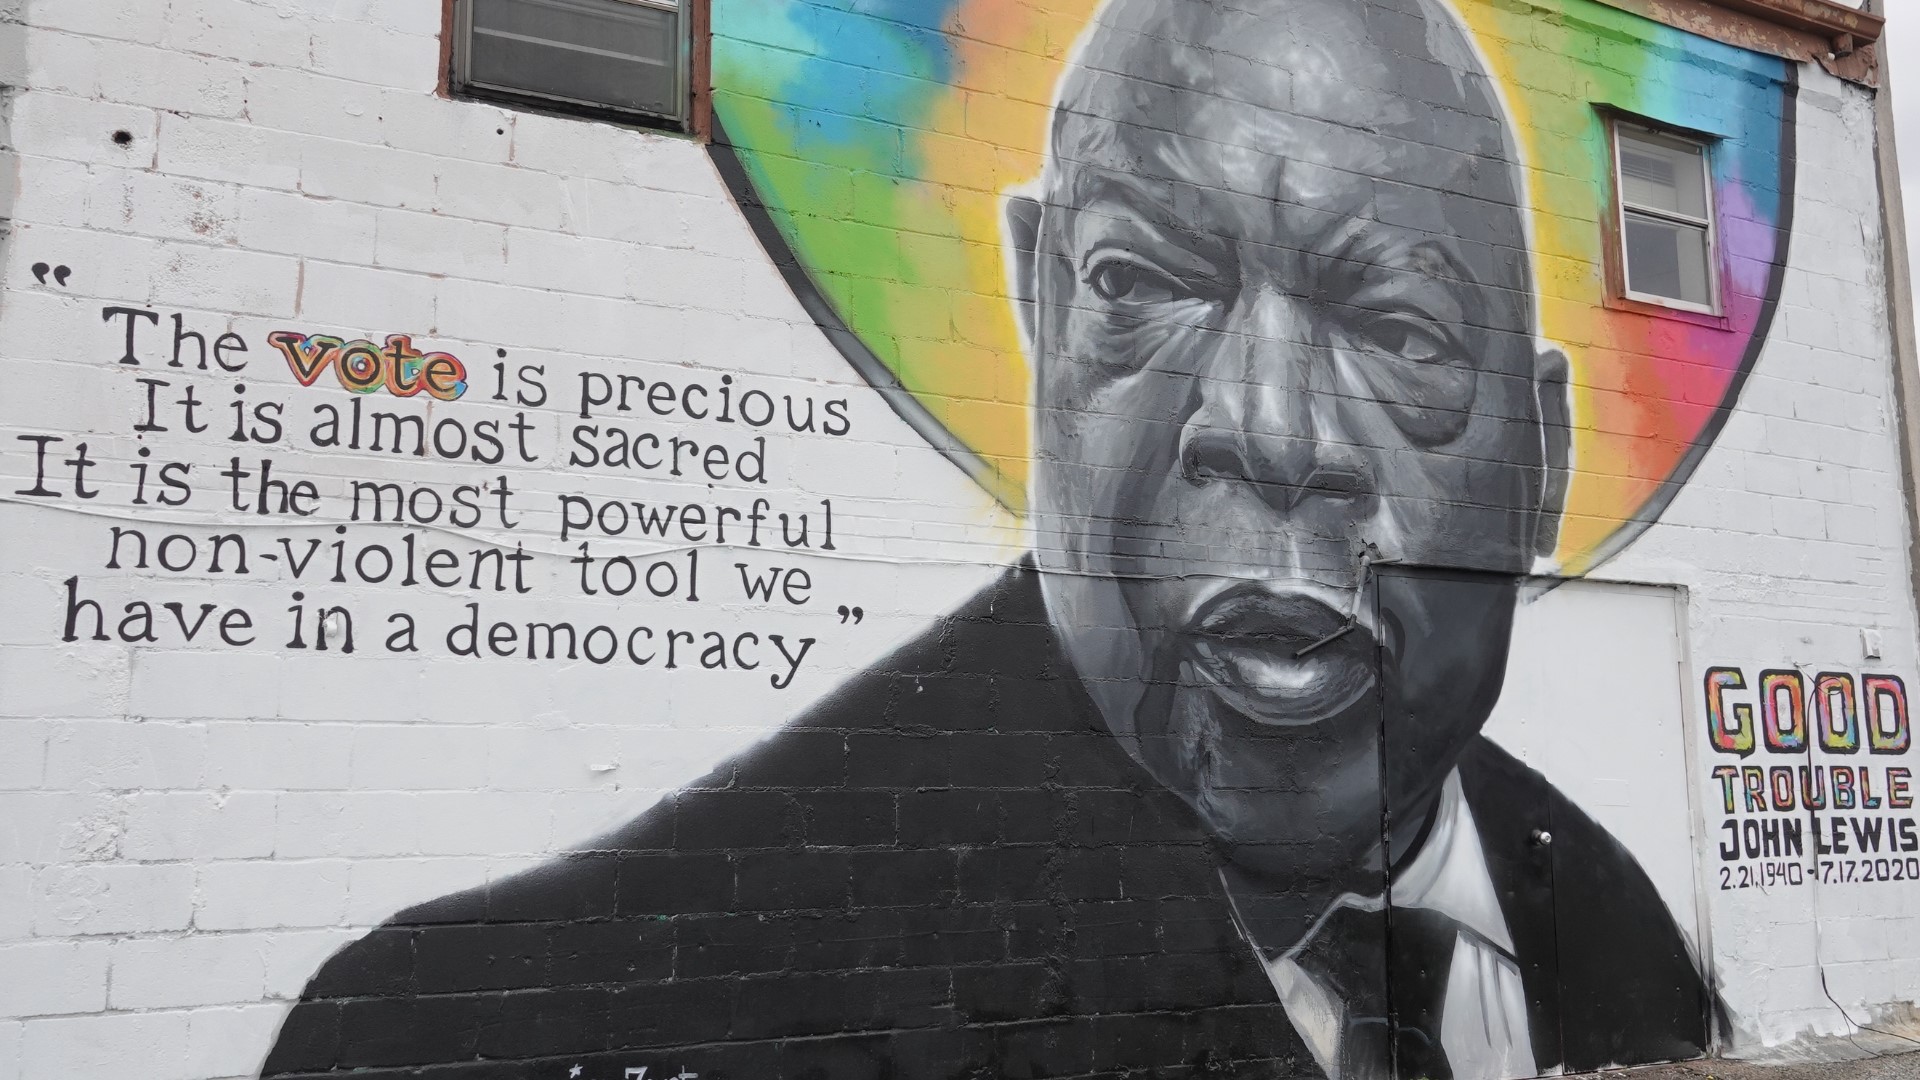 Kevin 'Scene' Lewis was commissioned by Black Voters Matter to create the mural as a reminder of how powerful the act of voting is